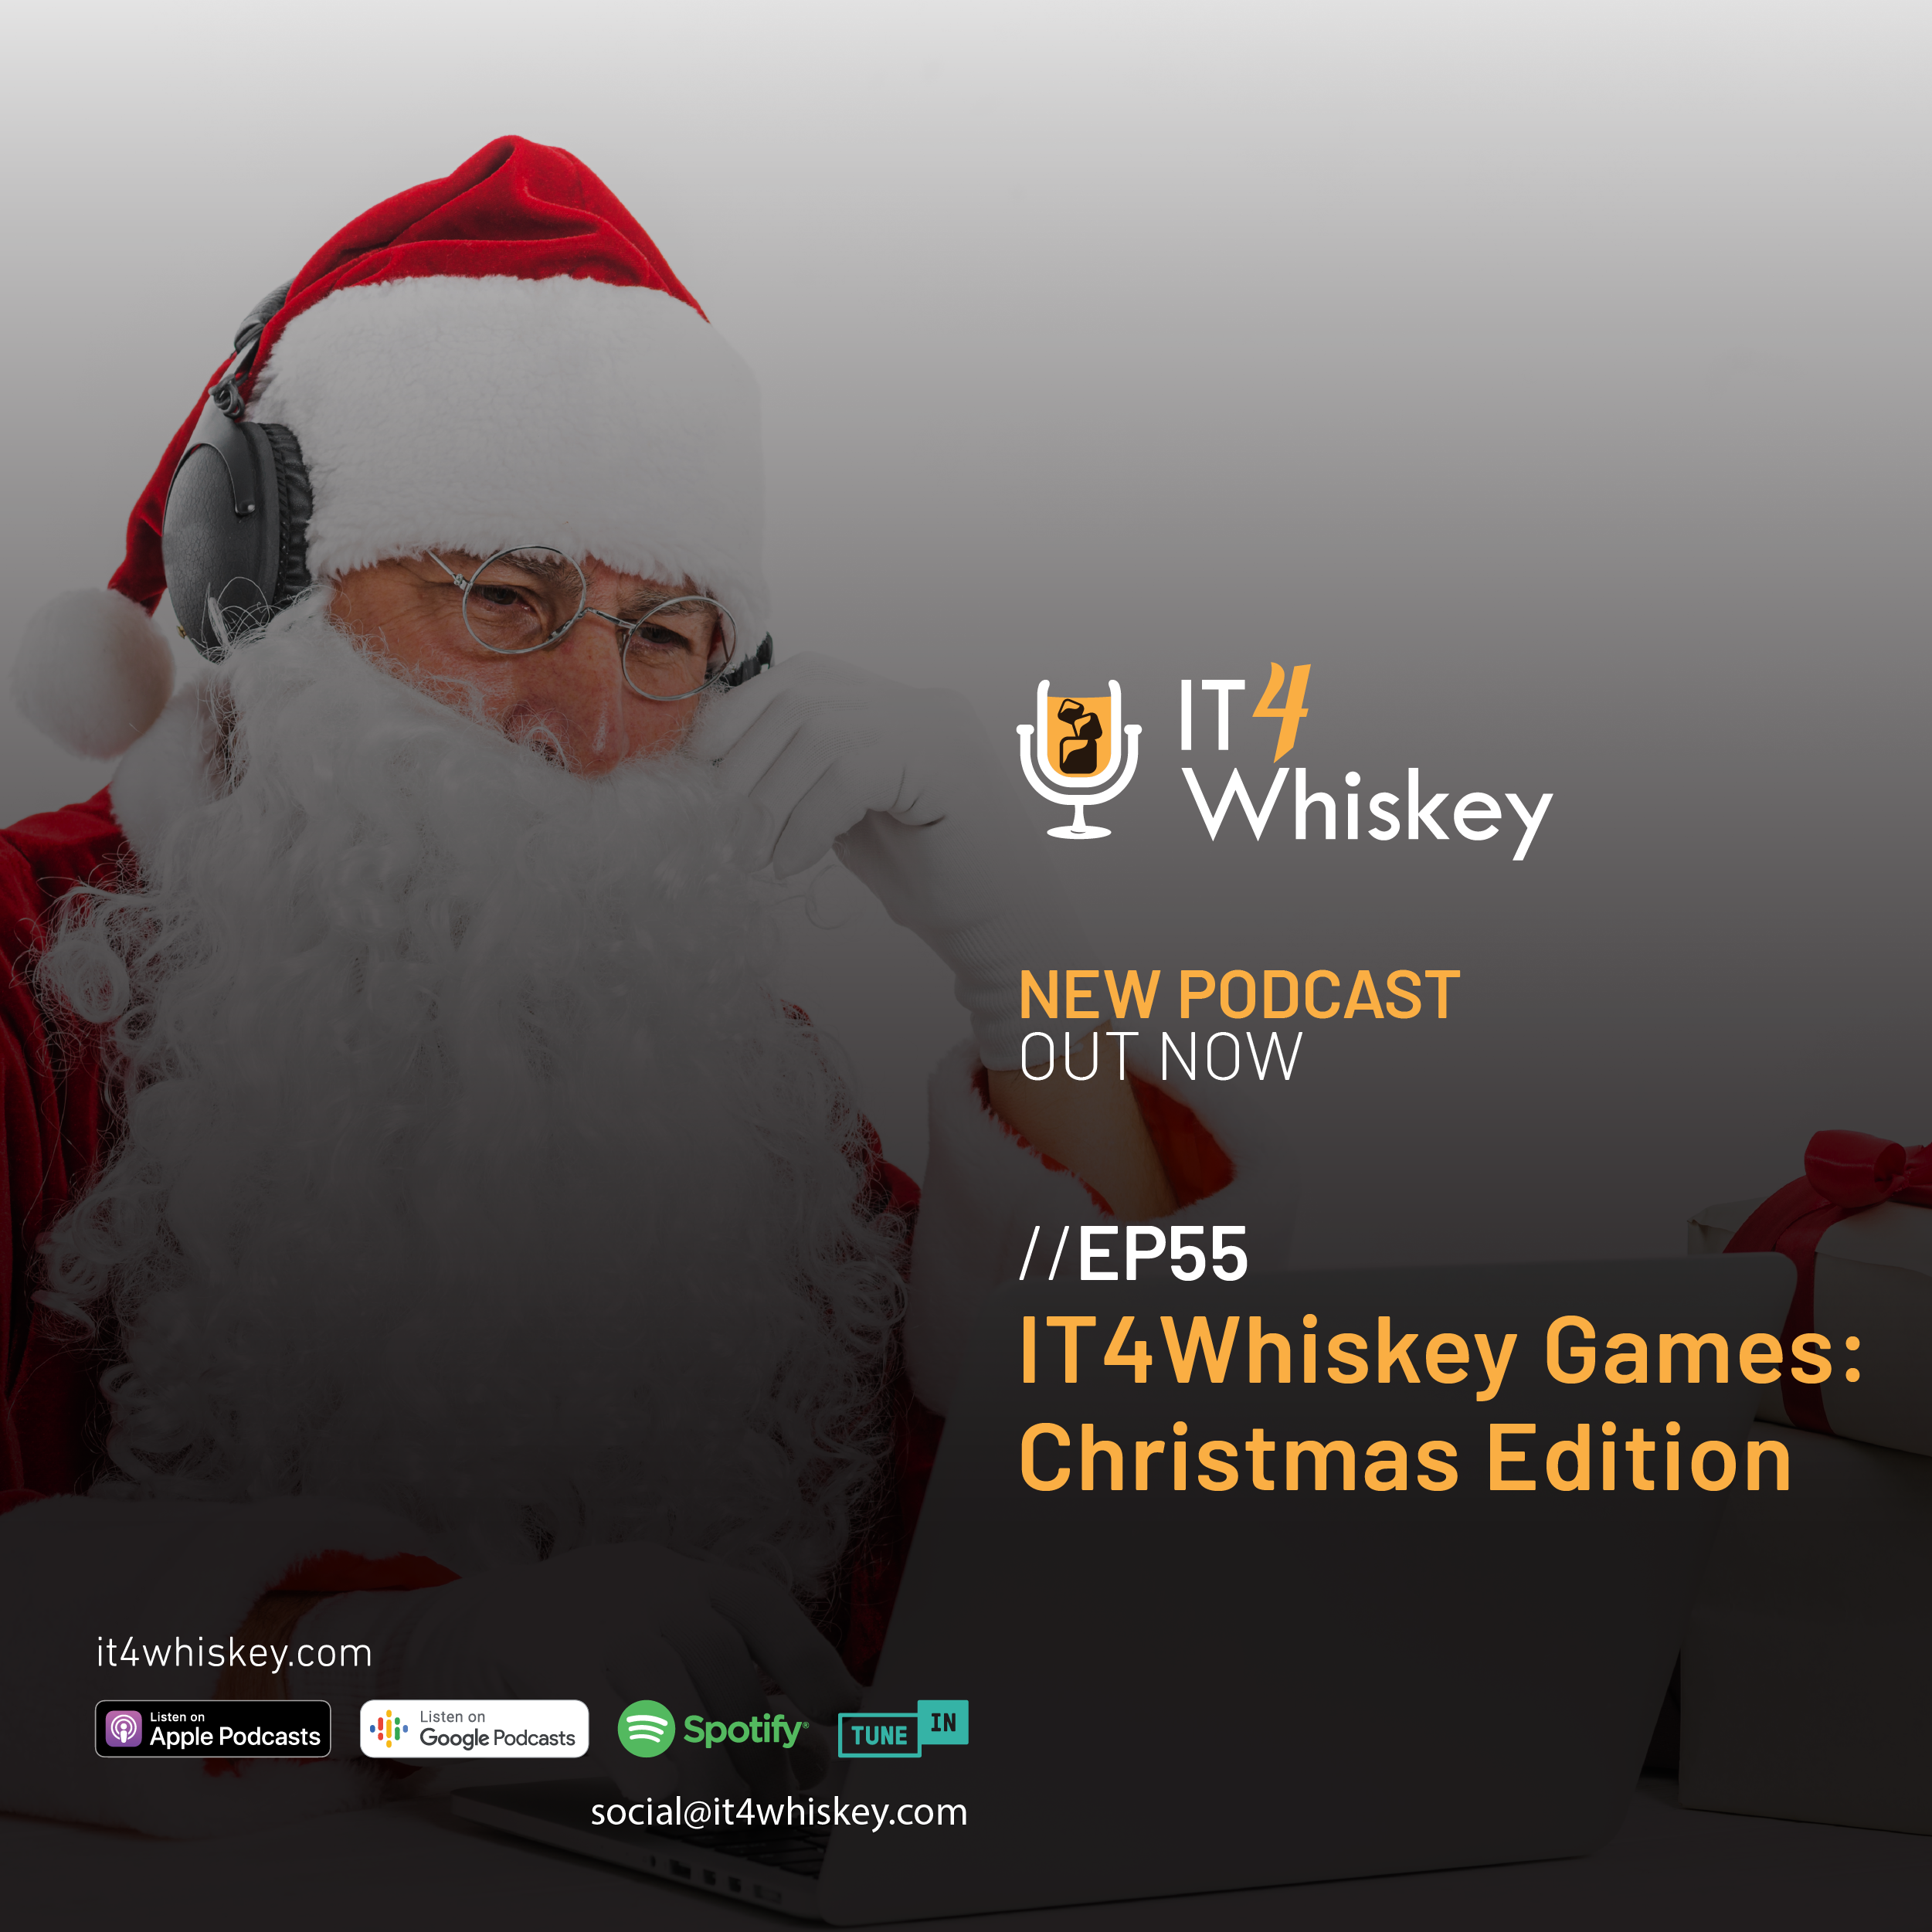 EP55 - IT4Whiskey Games: Christmas Edition